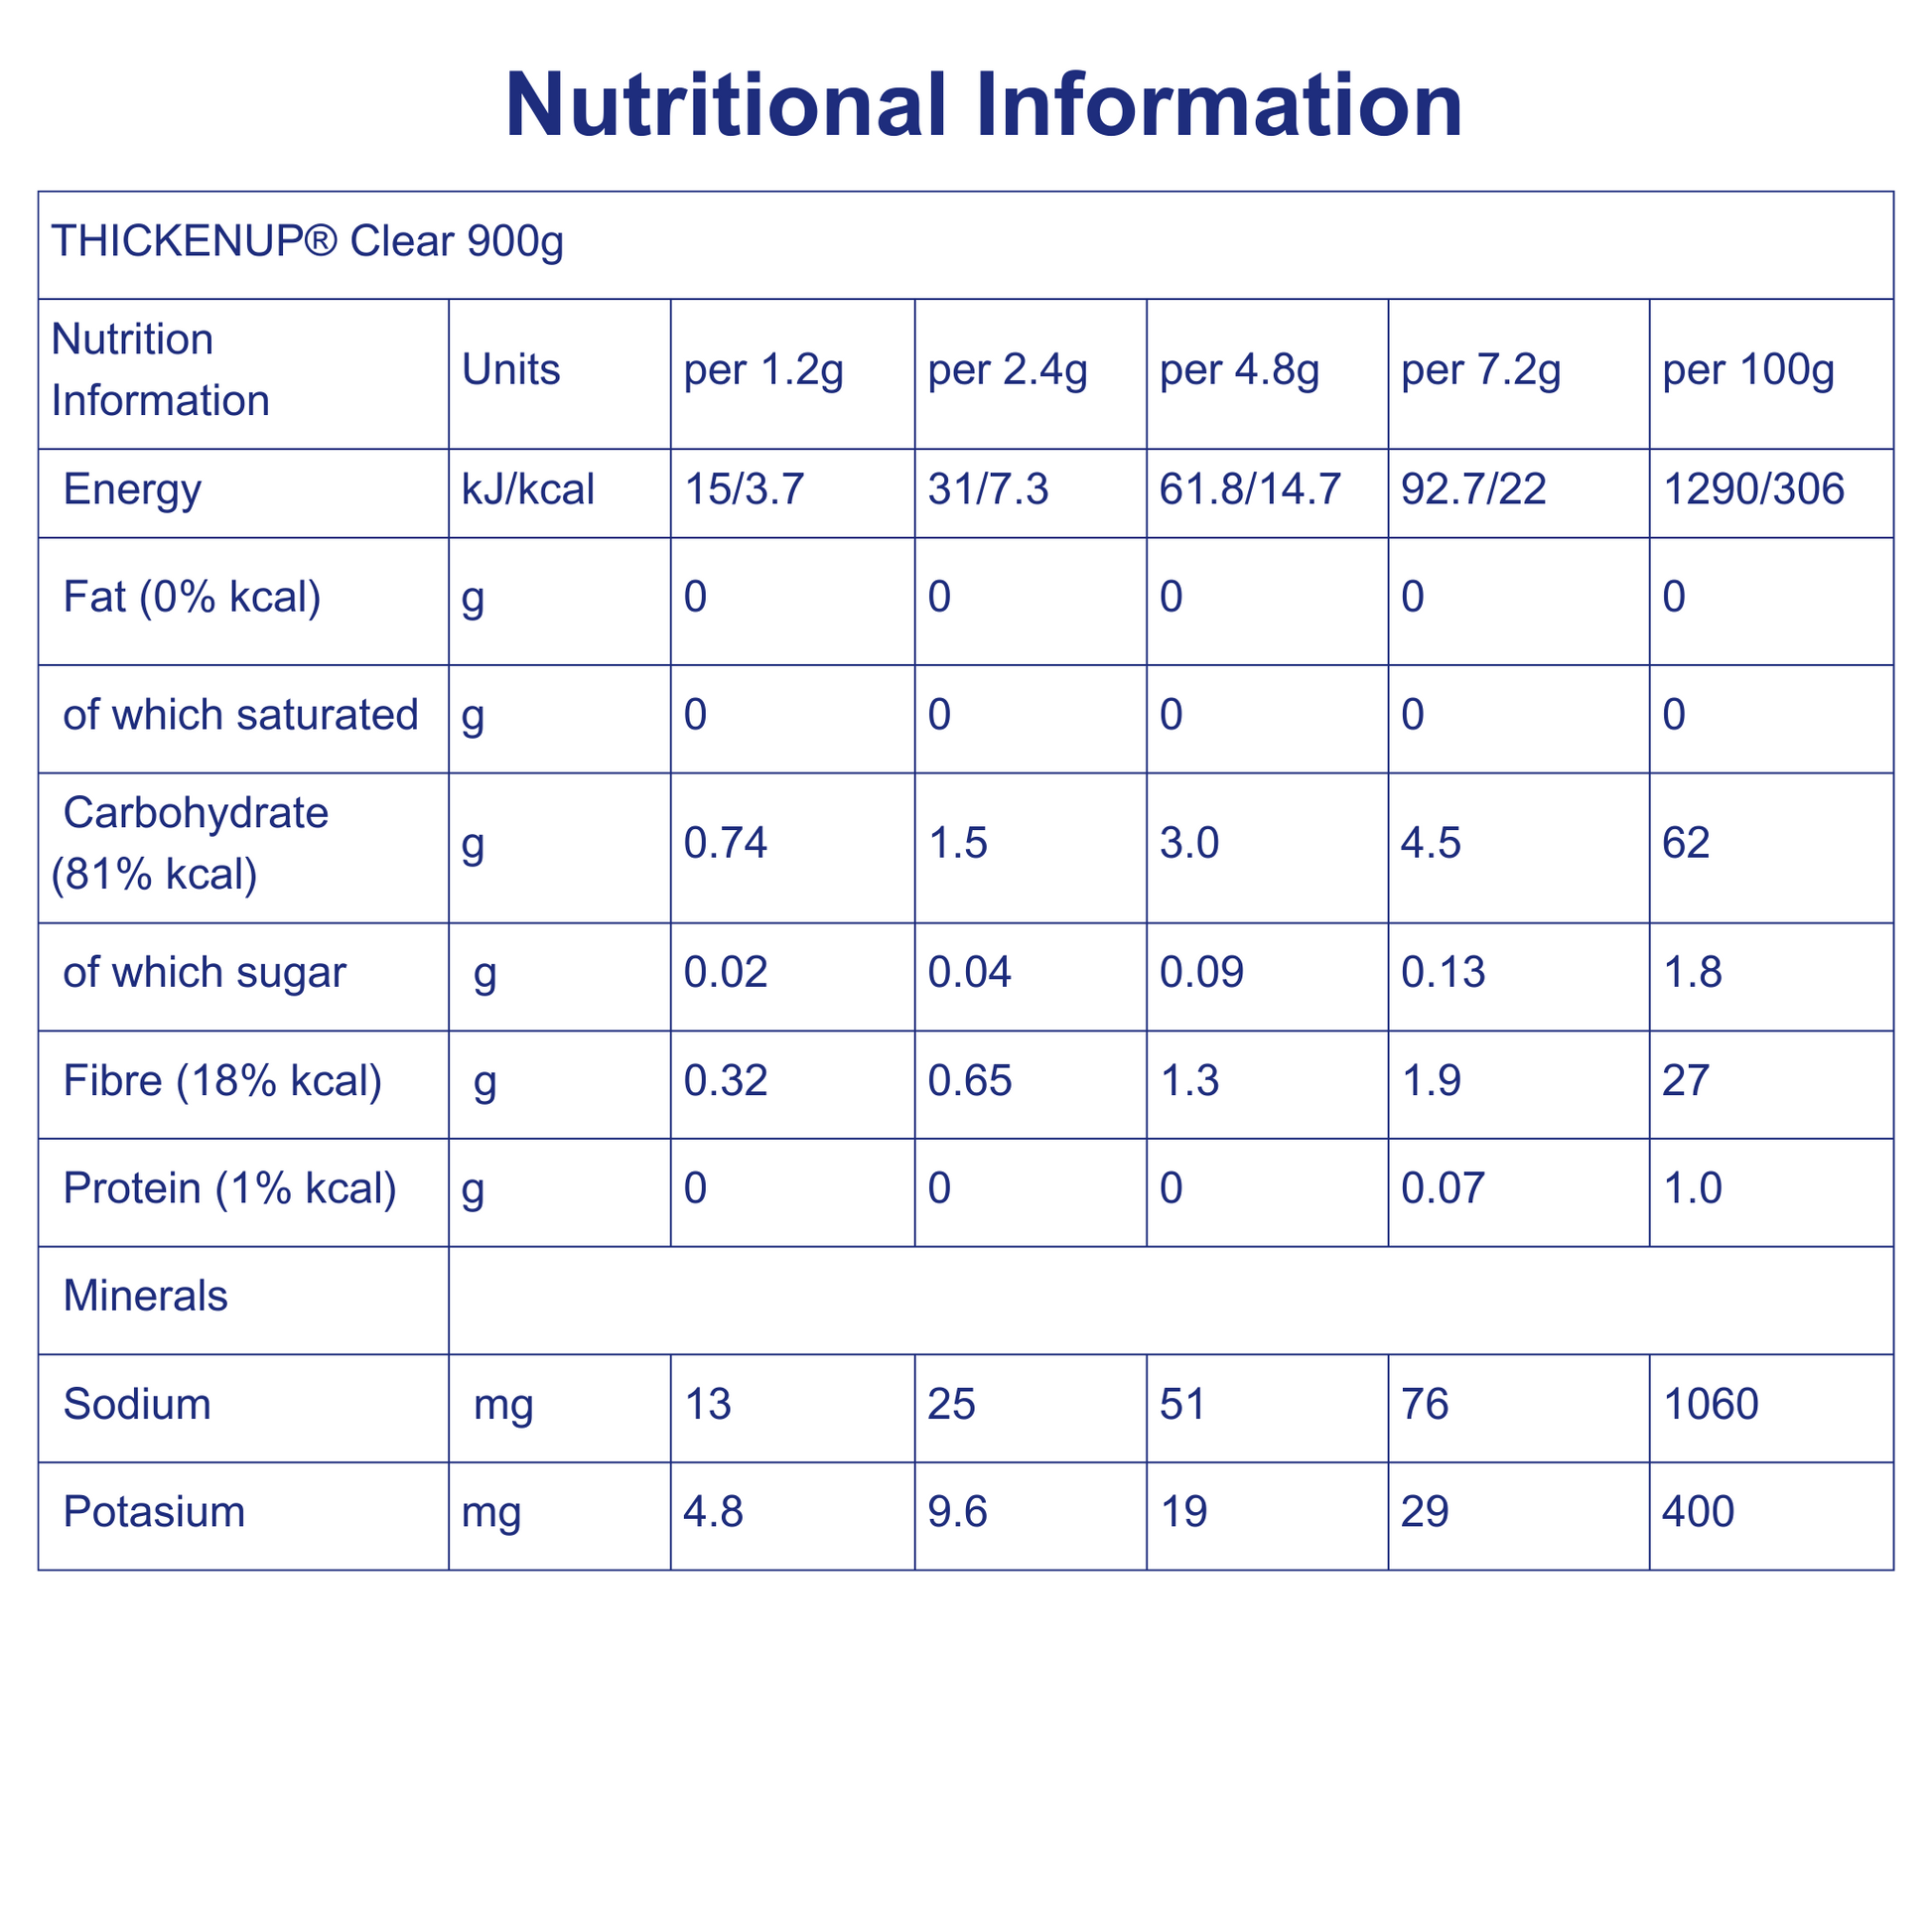 Thickenup nutritional information